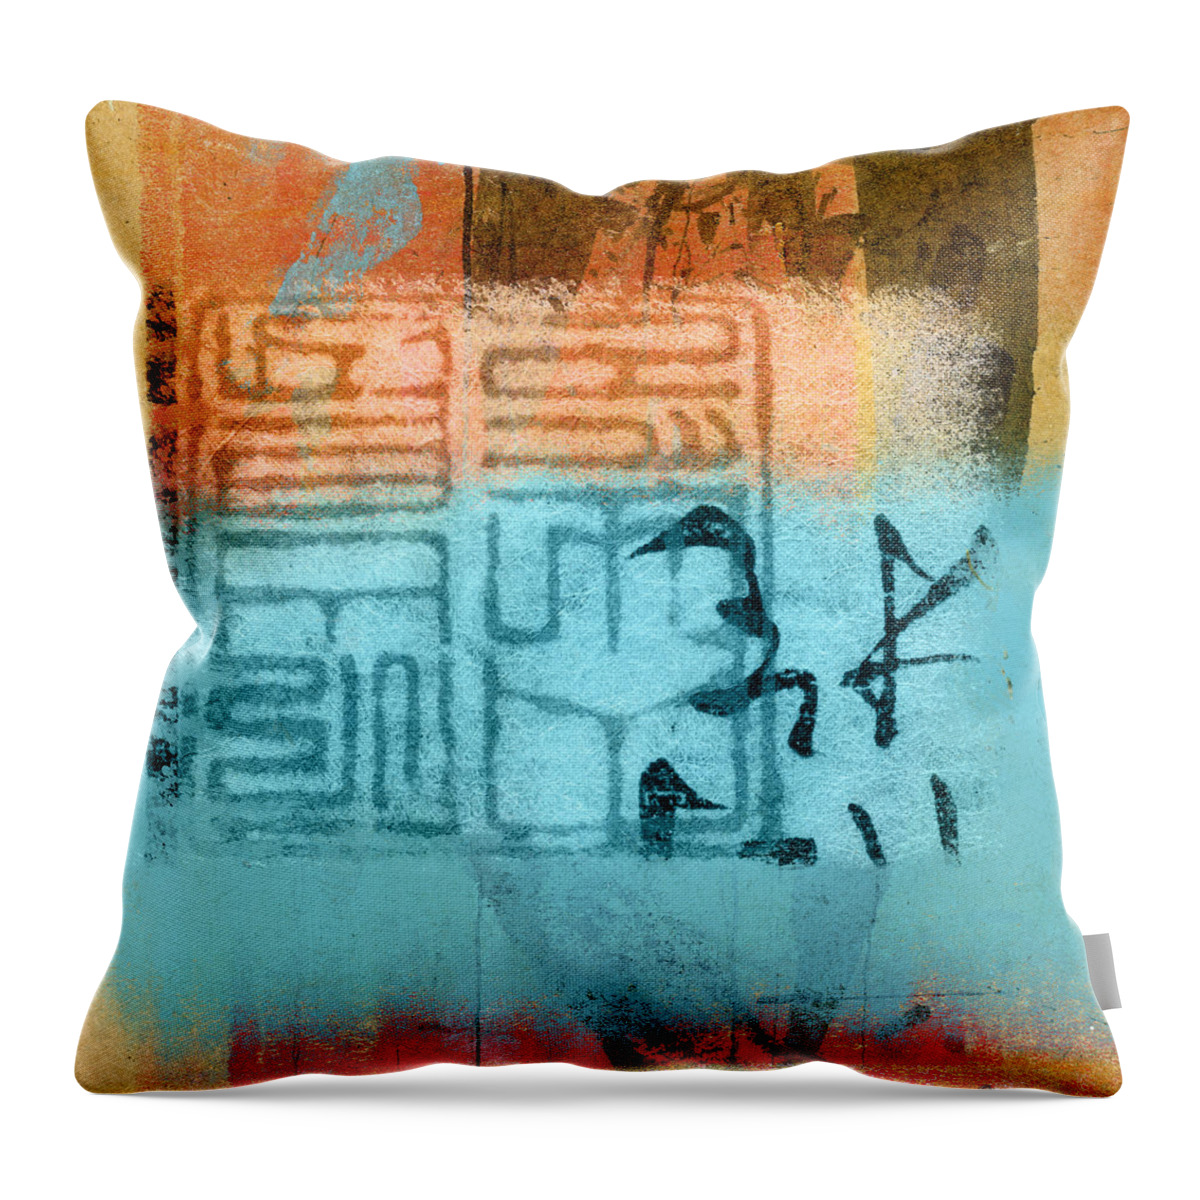 Calligraphy Throw Pillow featuring the photograph Clouded Calligraphy by Carol Leigh